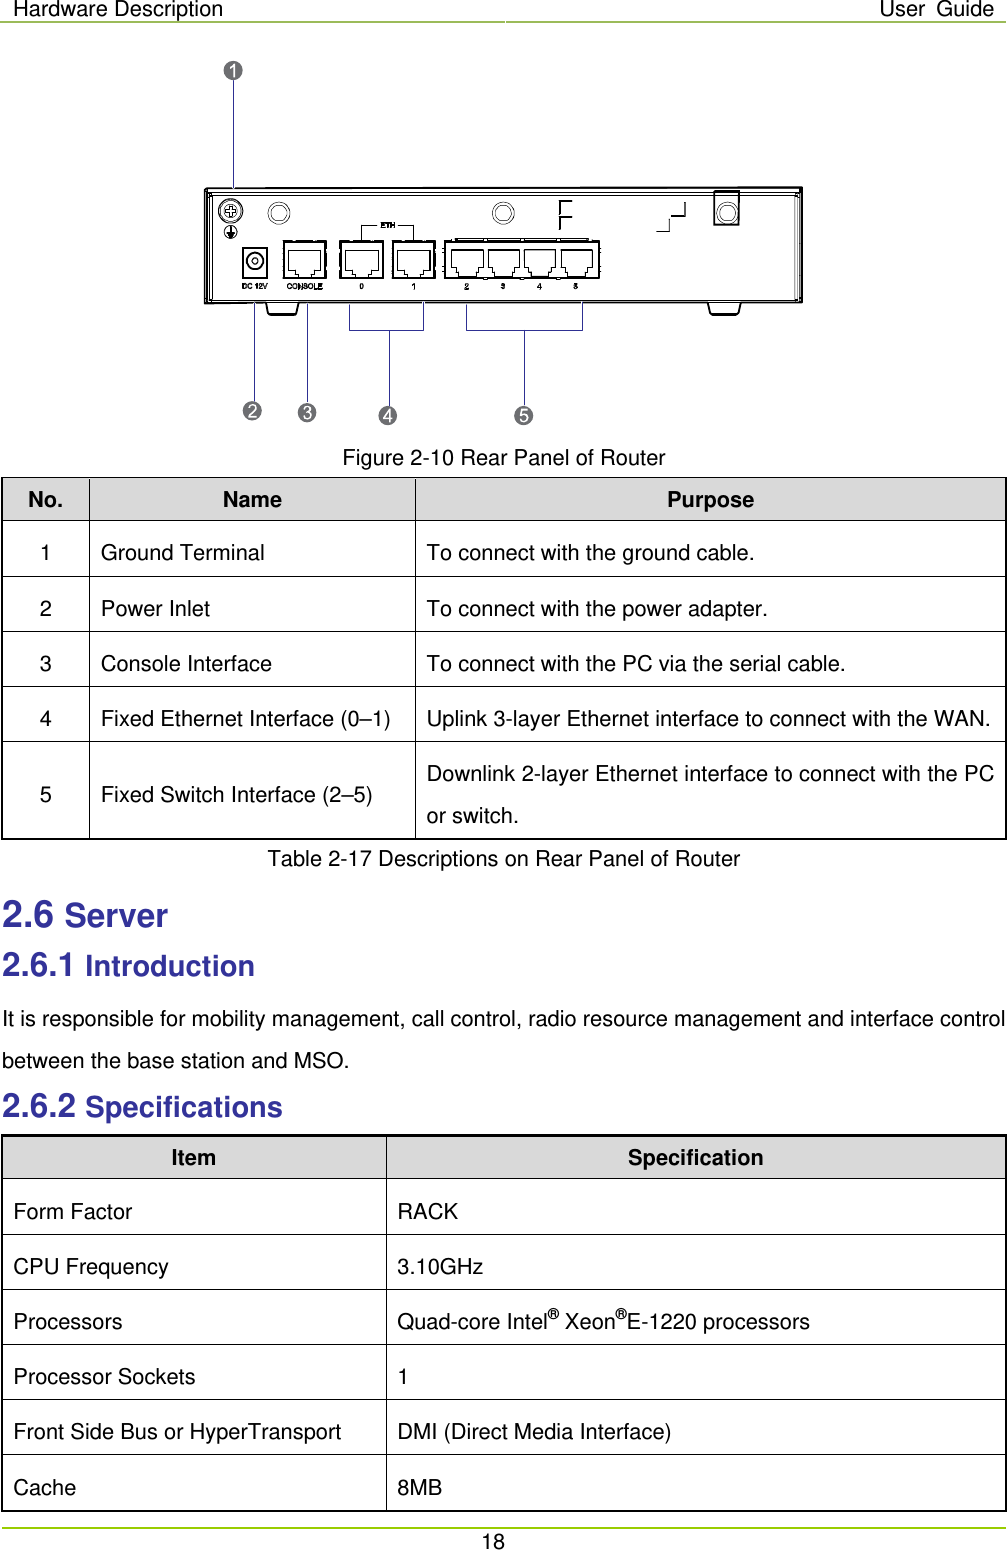 Hardware Description User Guide  18   Figure 2-10 Rear Panel of Router No. Name Purpose 1  Ground Terminal To connect with the ground cable. 2  Power Inlet To connect with the power adapter. 3  Console Interface To connect with the PC via the serial cable. 4  Fixed Ethernet Interface (0–1) Uplink 3-layer Ethernet interface to connect with the WAN. 5  Fixed Switch Interface (2–5) Downlink 2-layer Ethernet interface to connect with the PC or switch. Table 2-17 Descriptions on Rear Panel of Router 2.6 Server 2.6.1 Introduction It is responsible for mobility management, call control, radio resource management and interface control between the base station and MSO. 2.6.2 Specifications Item Specification Form Factor RACK CPU Frequency 3.10GHz Processors Quad-core Intel® Xeon®E-1220 processors Processor Sockets    1 Front Side Bus or HyperTransport DMI (Direct Media Interface)   Cache   8MB   